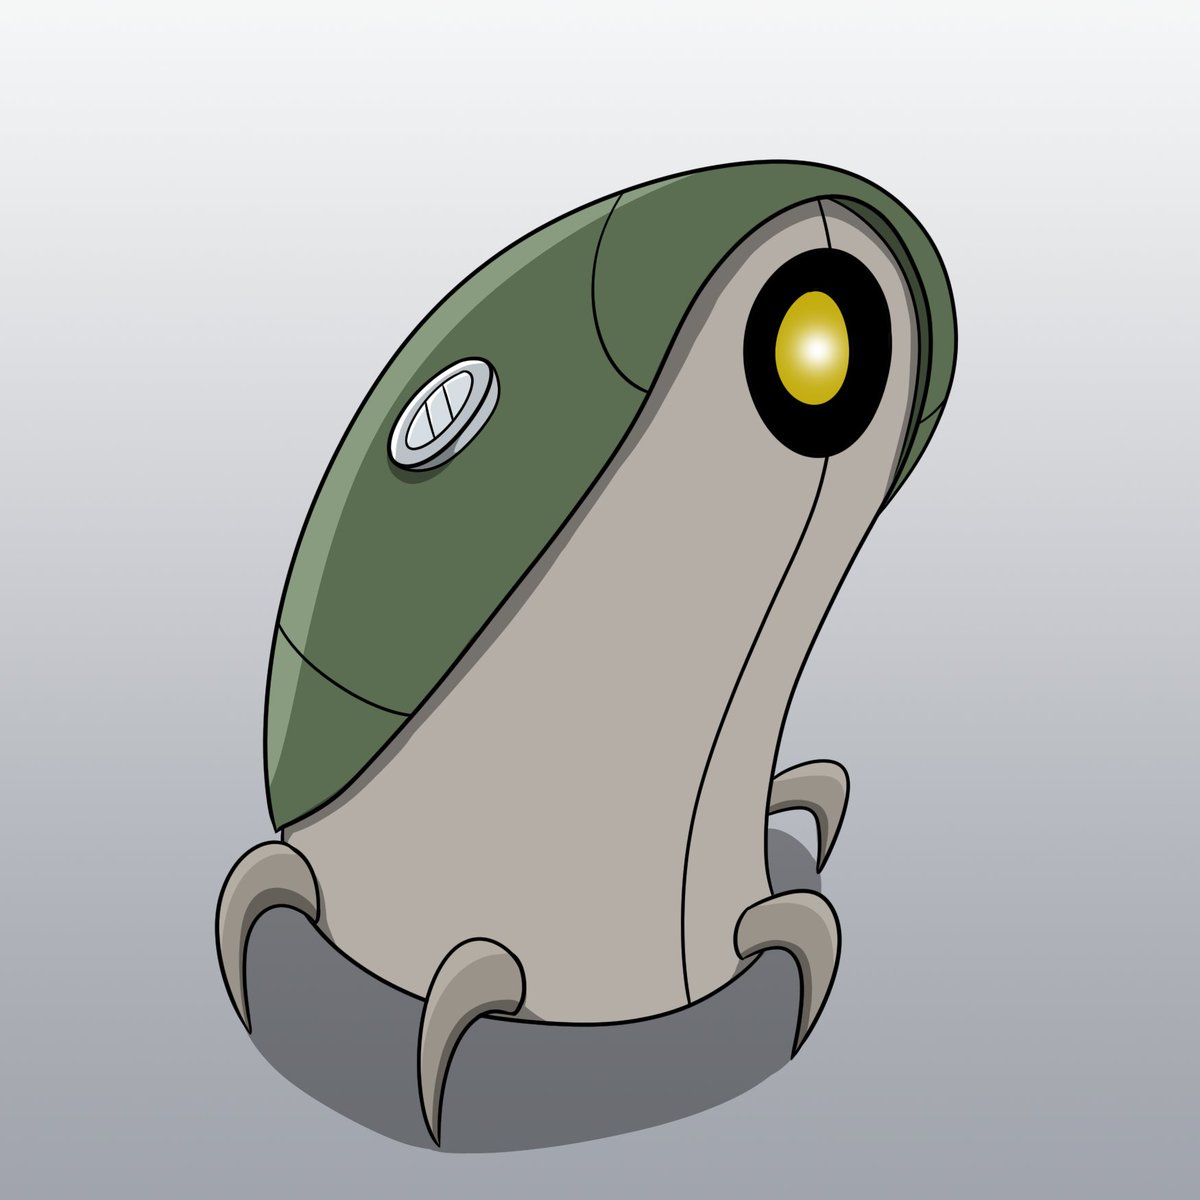 Here is a robot, bug like thing I drew. I call it a robug.

#robotart #robotdrawing #scifiart #digitalart #drawing